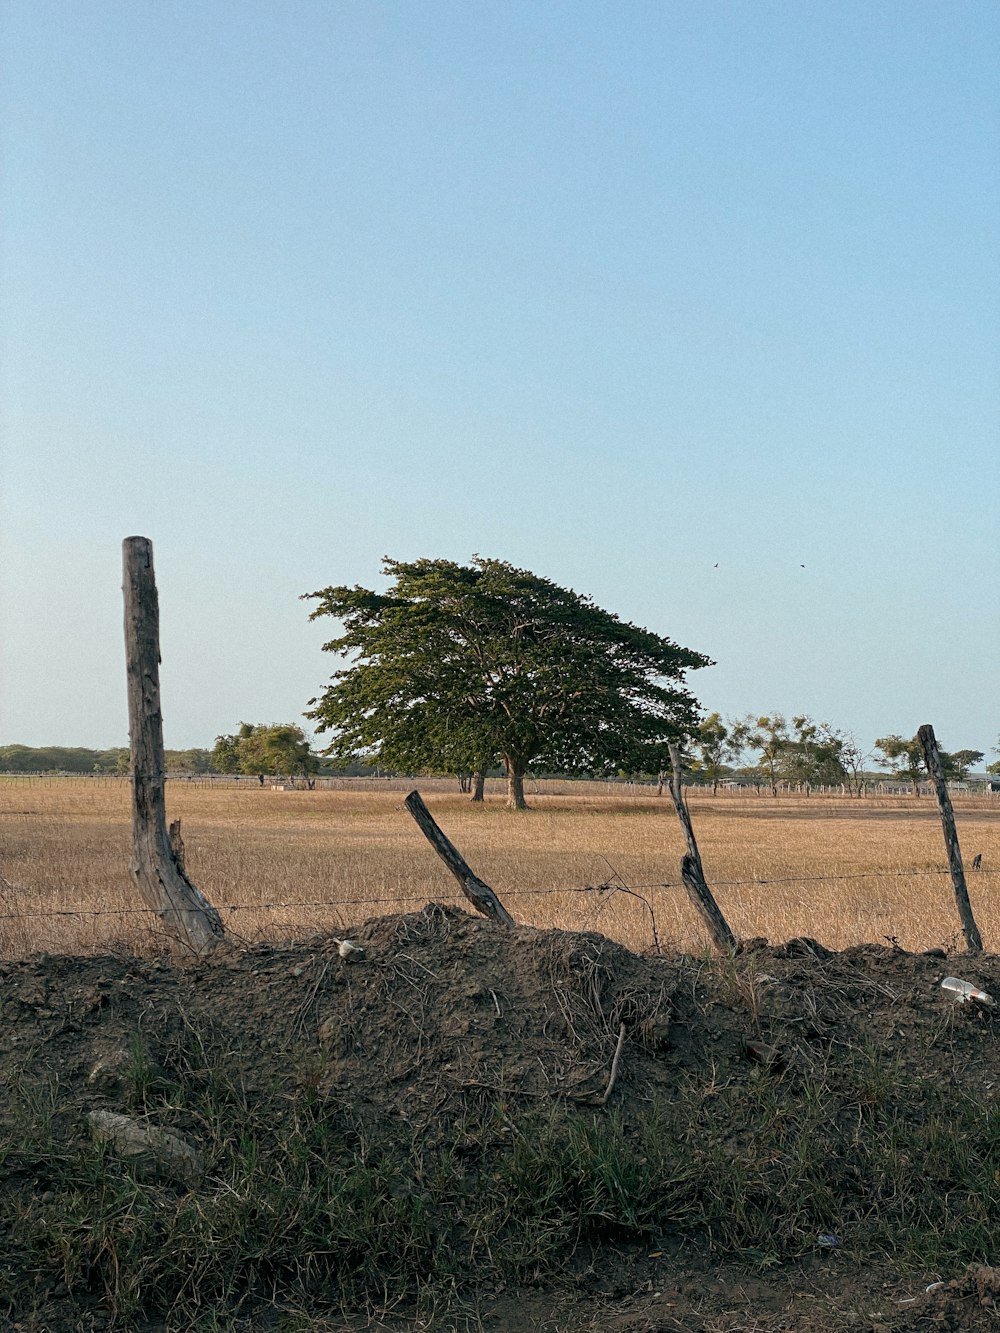 a giraffe standing next to a fence in a field